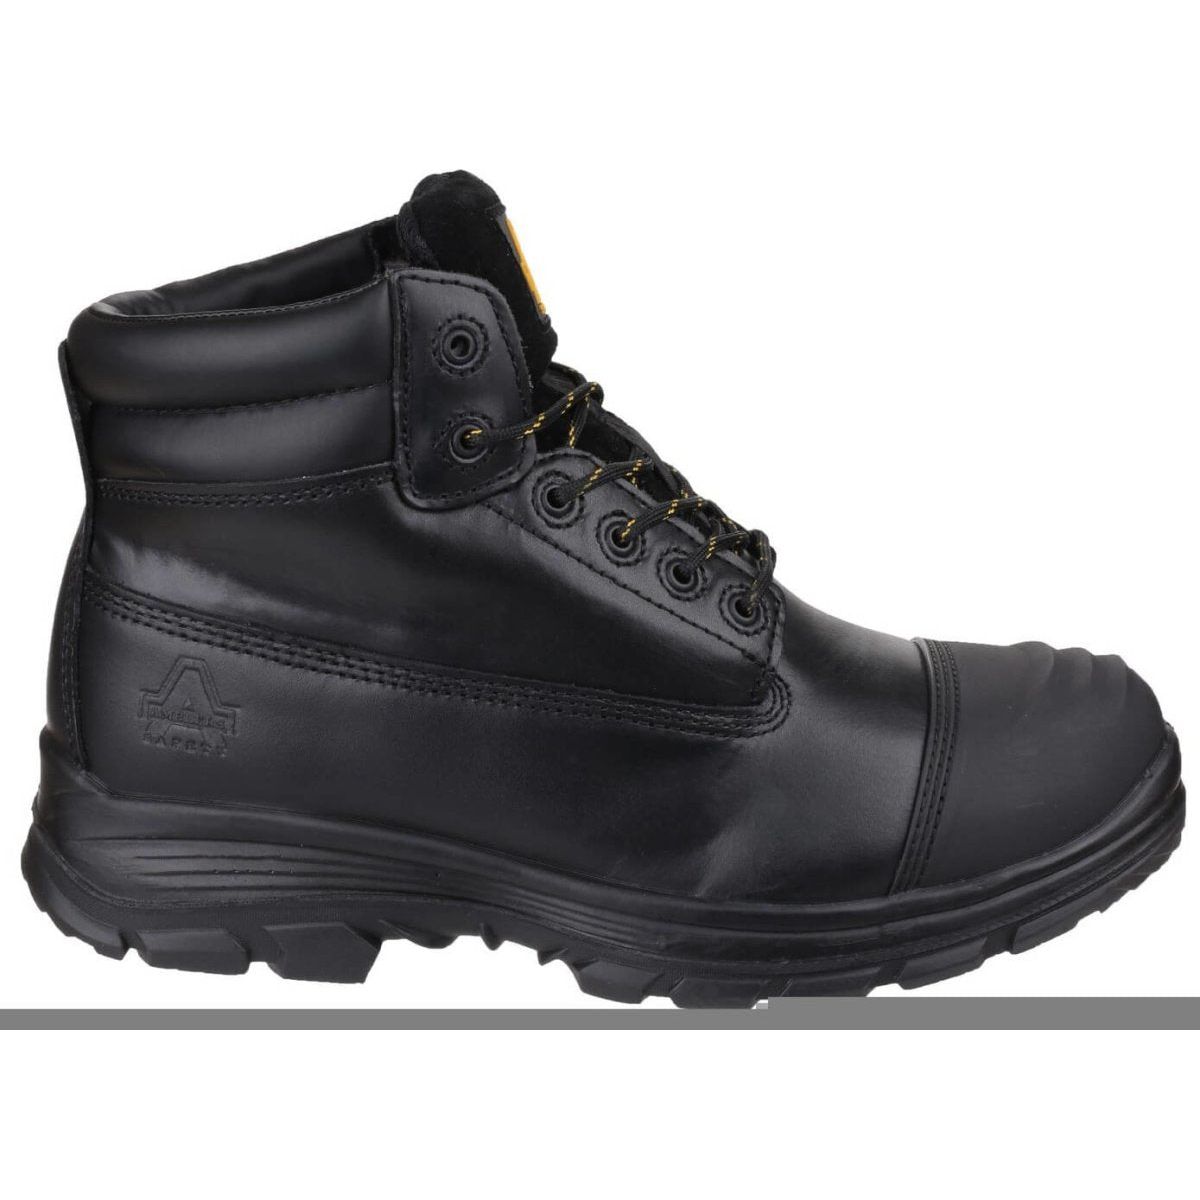 Amblers Fs301 Brecon Water-Resistant Safety Boots Mens - workweargurus.com